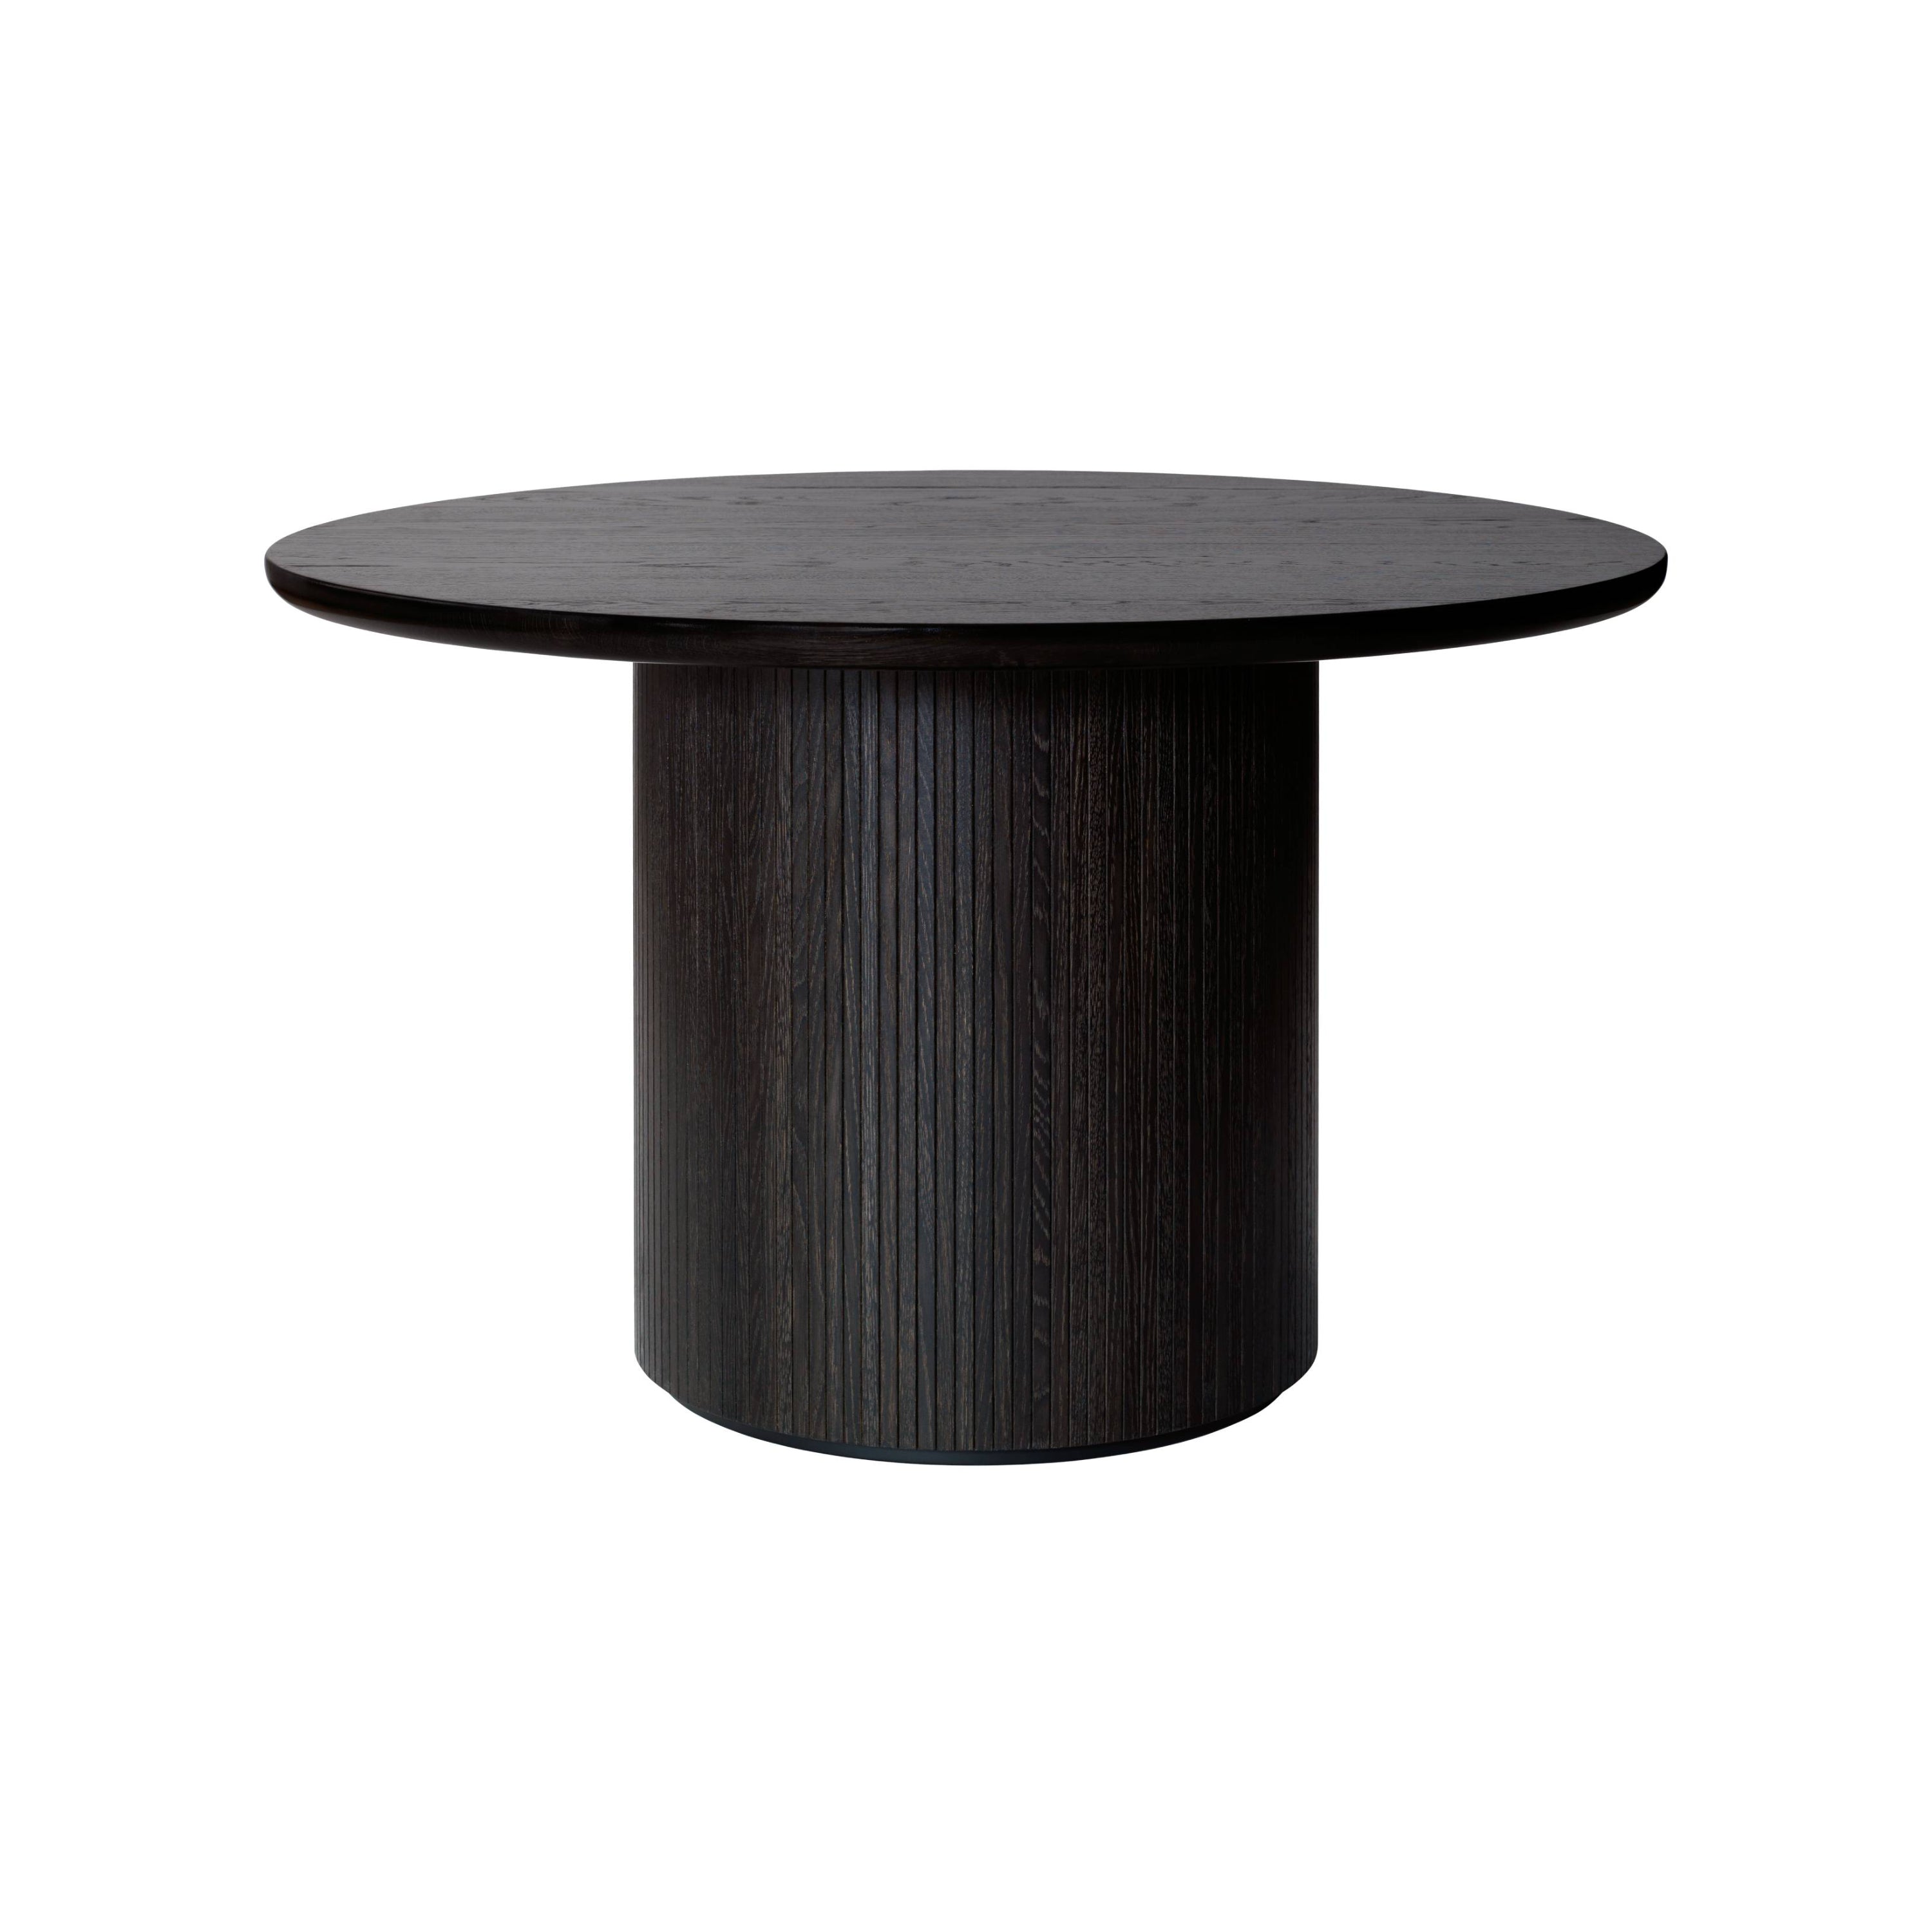 Moon Dining Table: Round + Small - 47.2